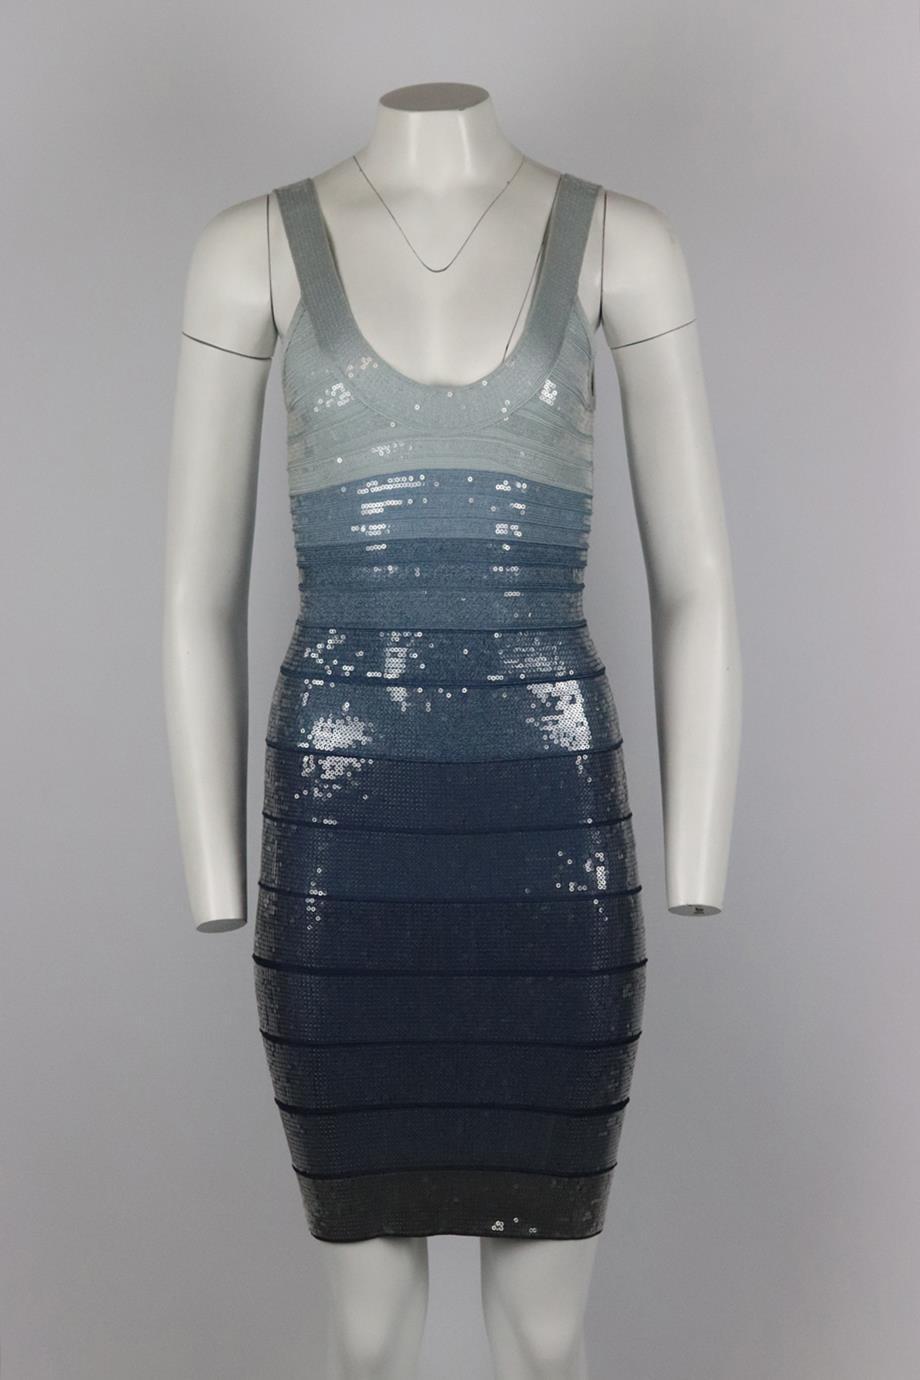 Herve Leger sequined bandage mini dress. Tonal-blue. Sleeveless, scoop neck. Zip fastening at back. 90% Rayon, 9% nylon, 1% spandex. Size: XSmall (UK 6, US 2, FR 34, IT 38). Bust: 30 in. Waist: 26 in. Hips: 35 in. Length: 37 in. Very good condition